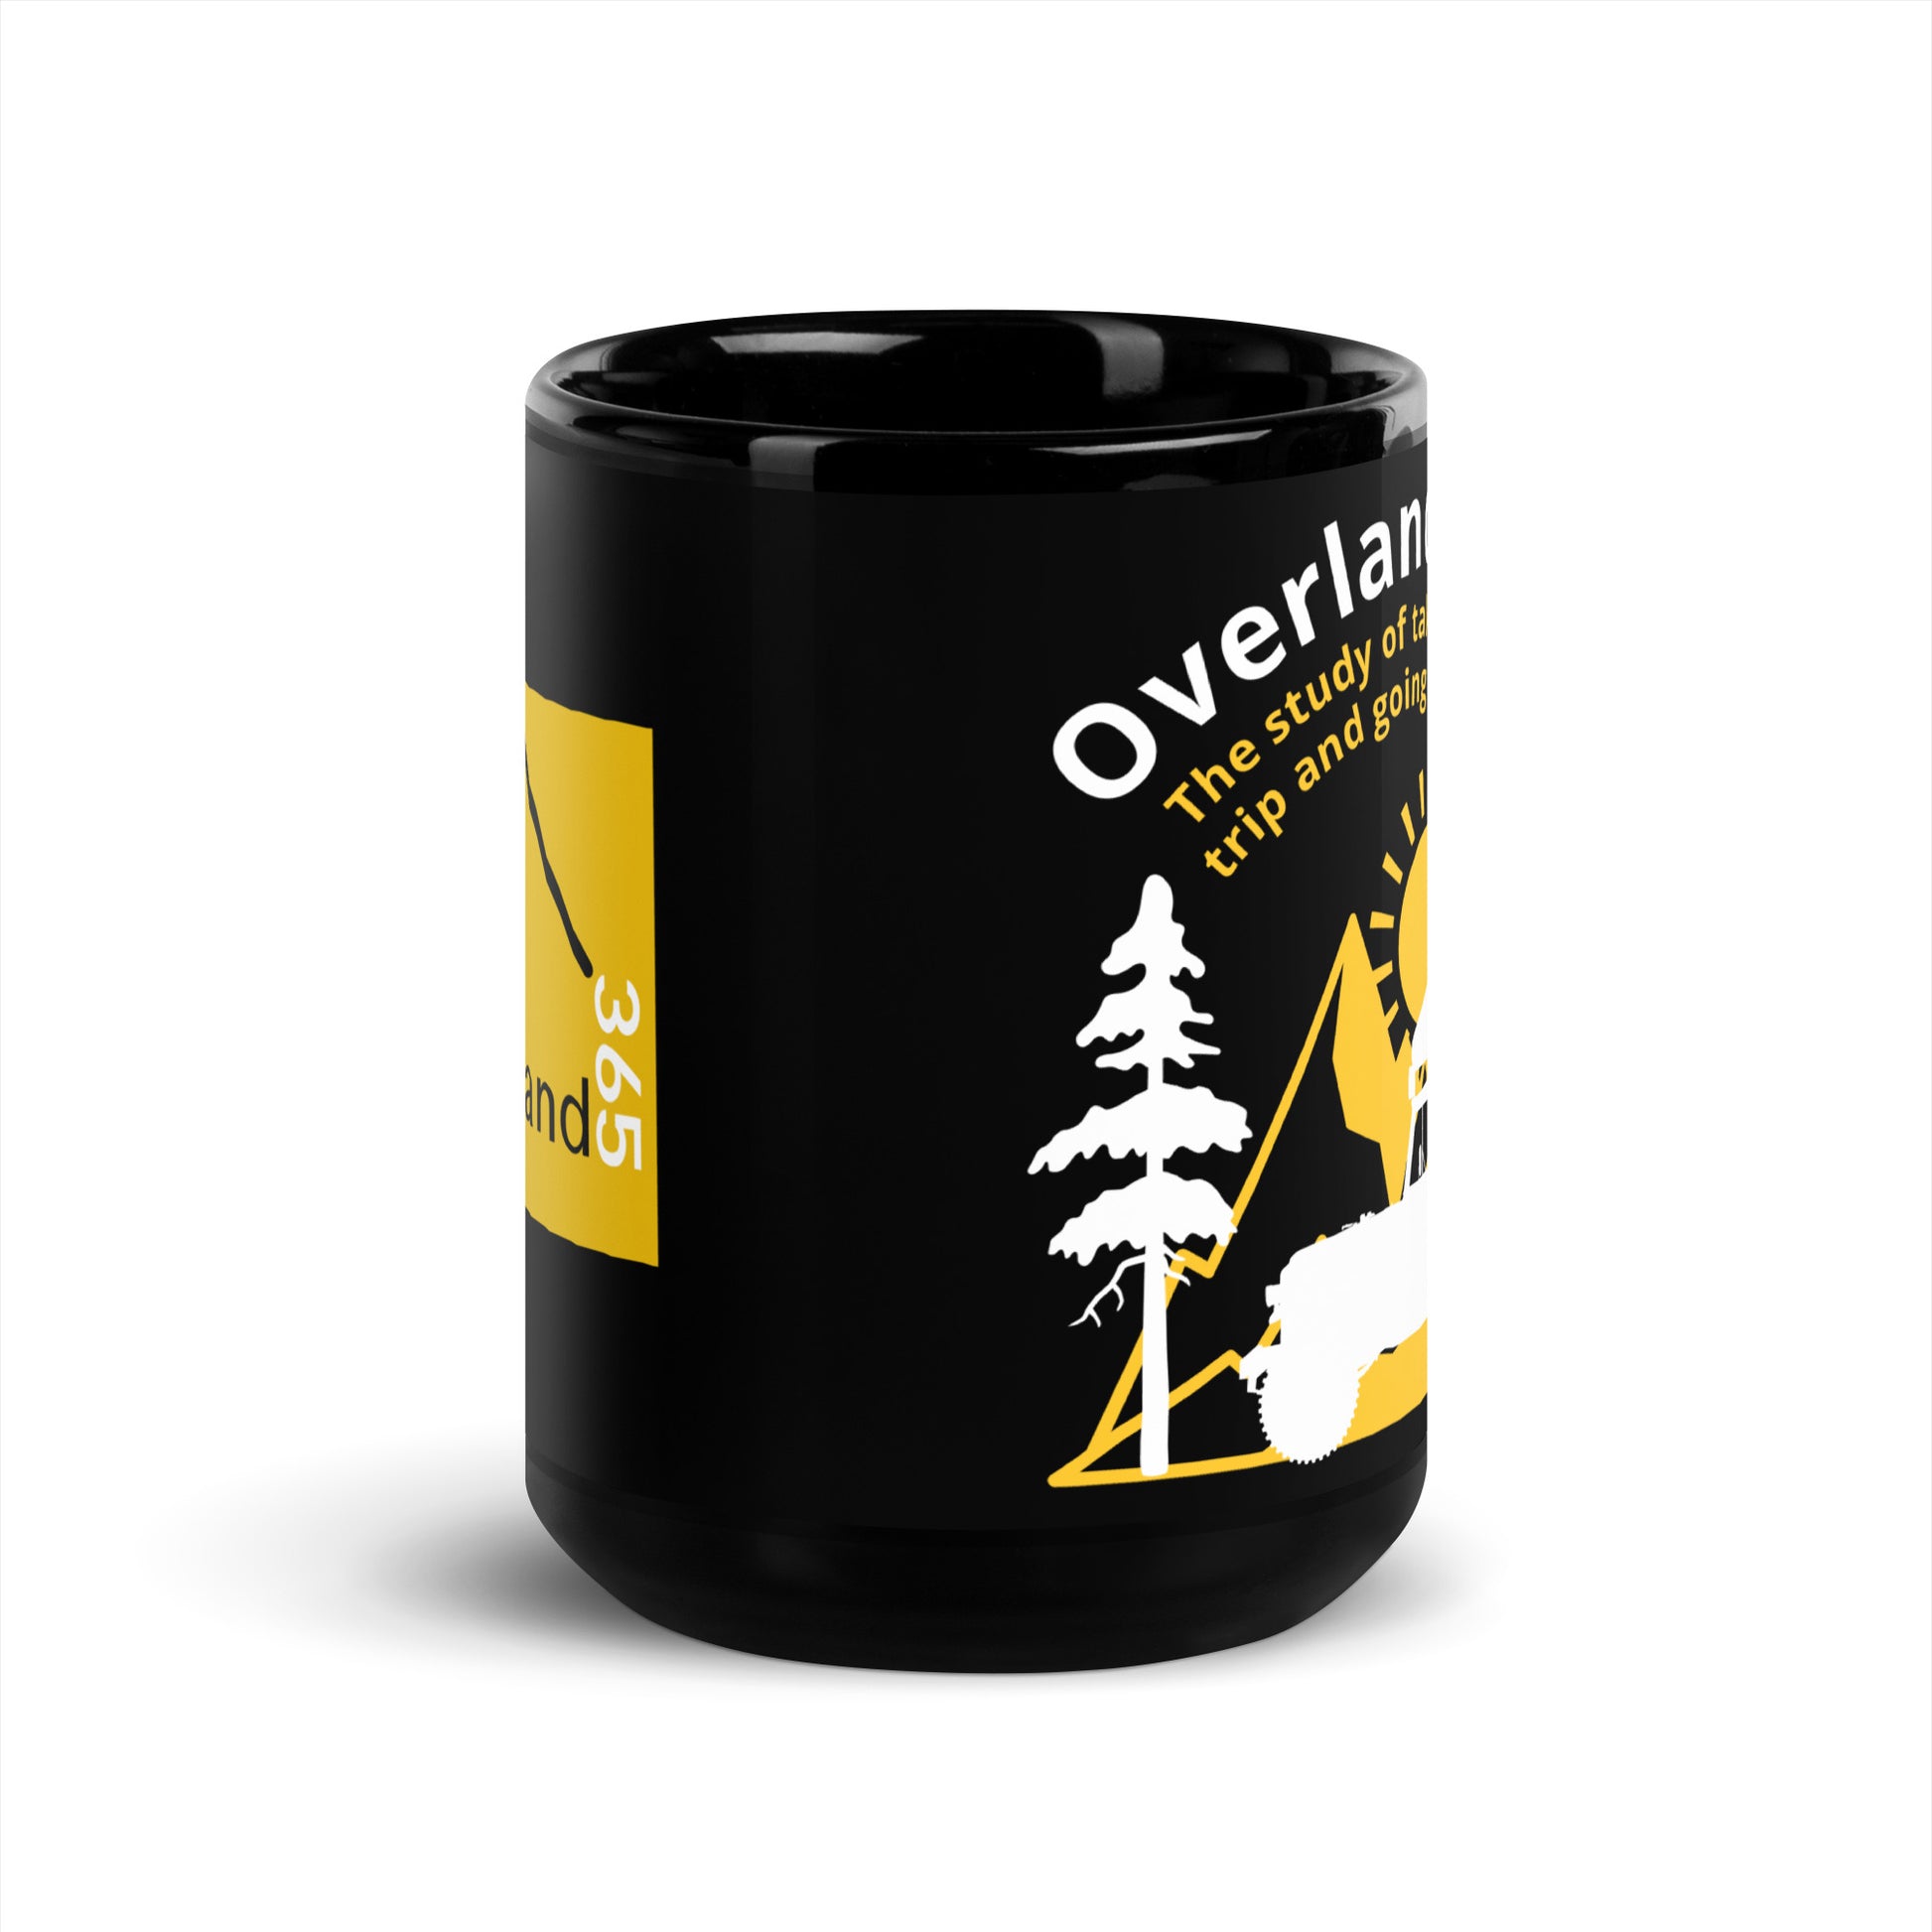 Black 15oz coffee mug. Overland-ology. The study of taking a road trip and going camping. side view. overland365.com